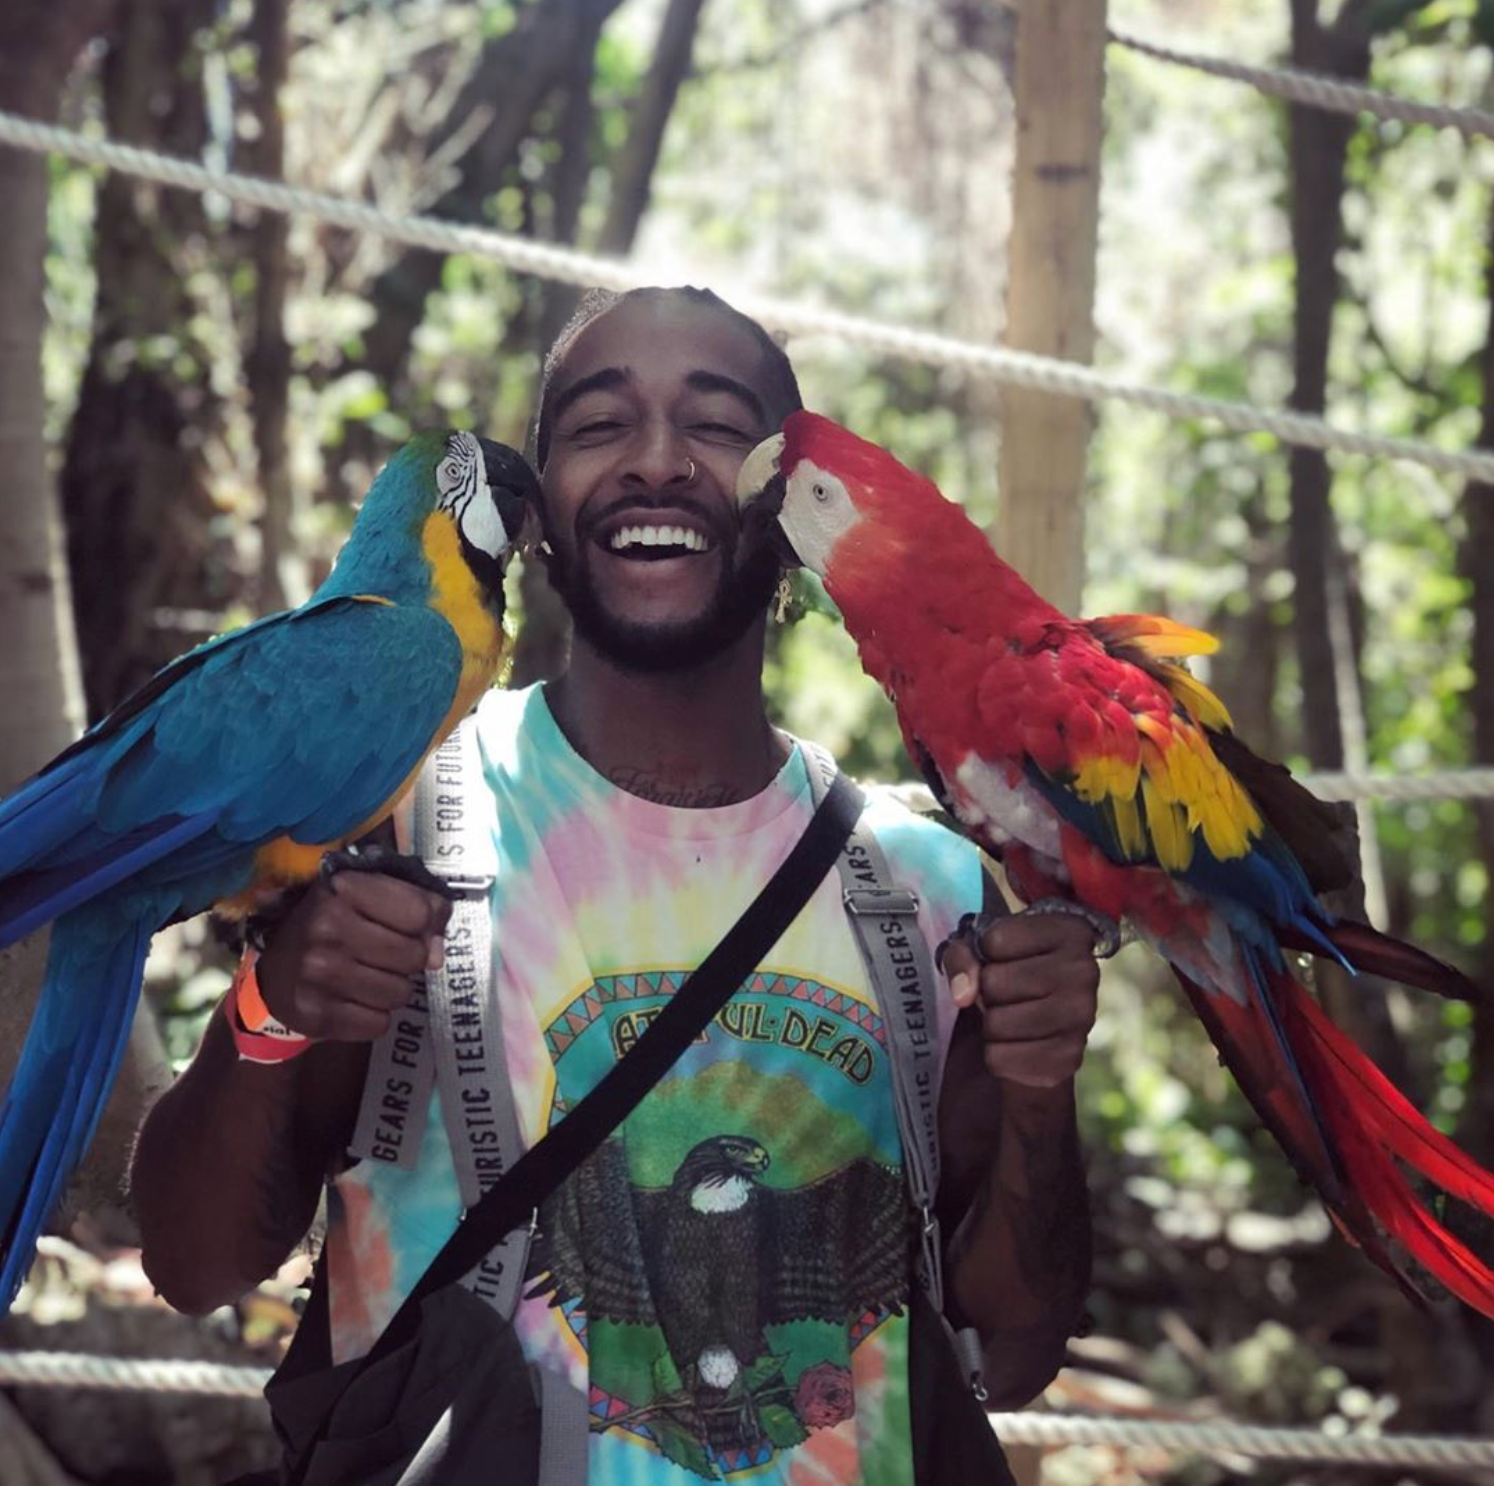 10 Photos That Prove Omarion Is The King Of Good Vibes